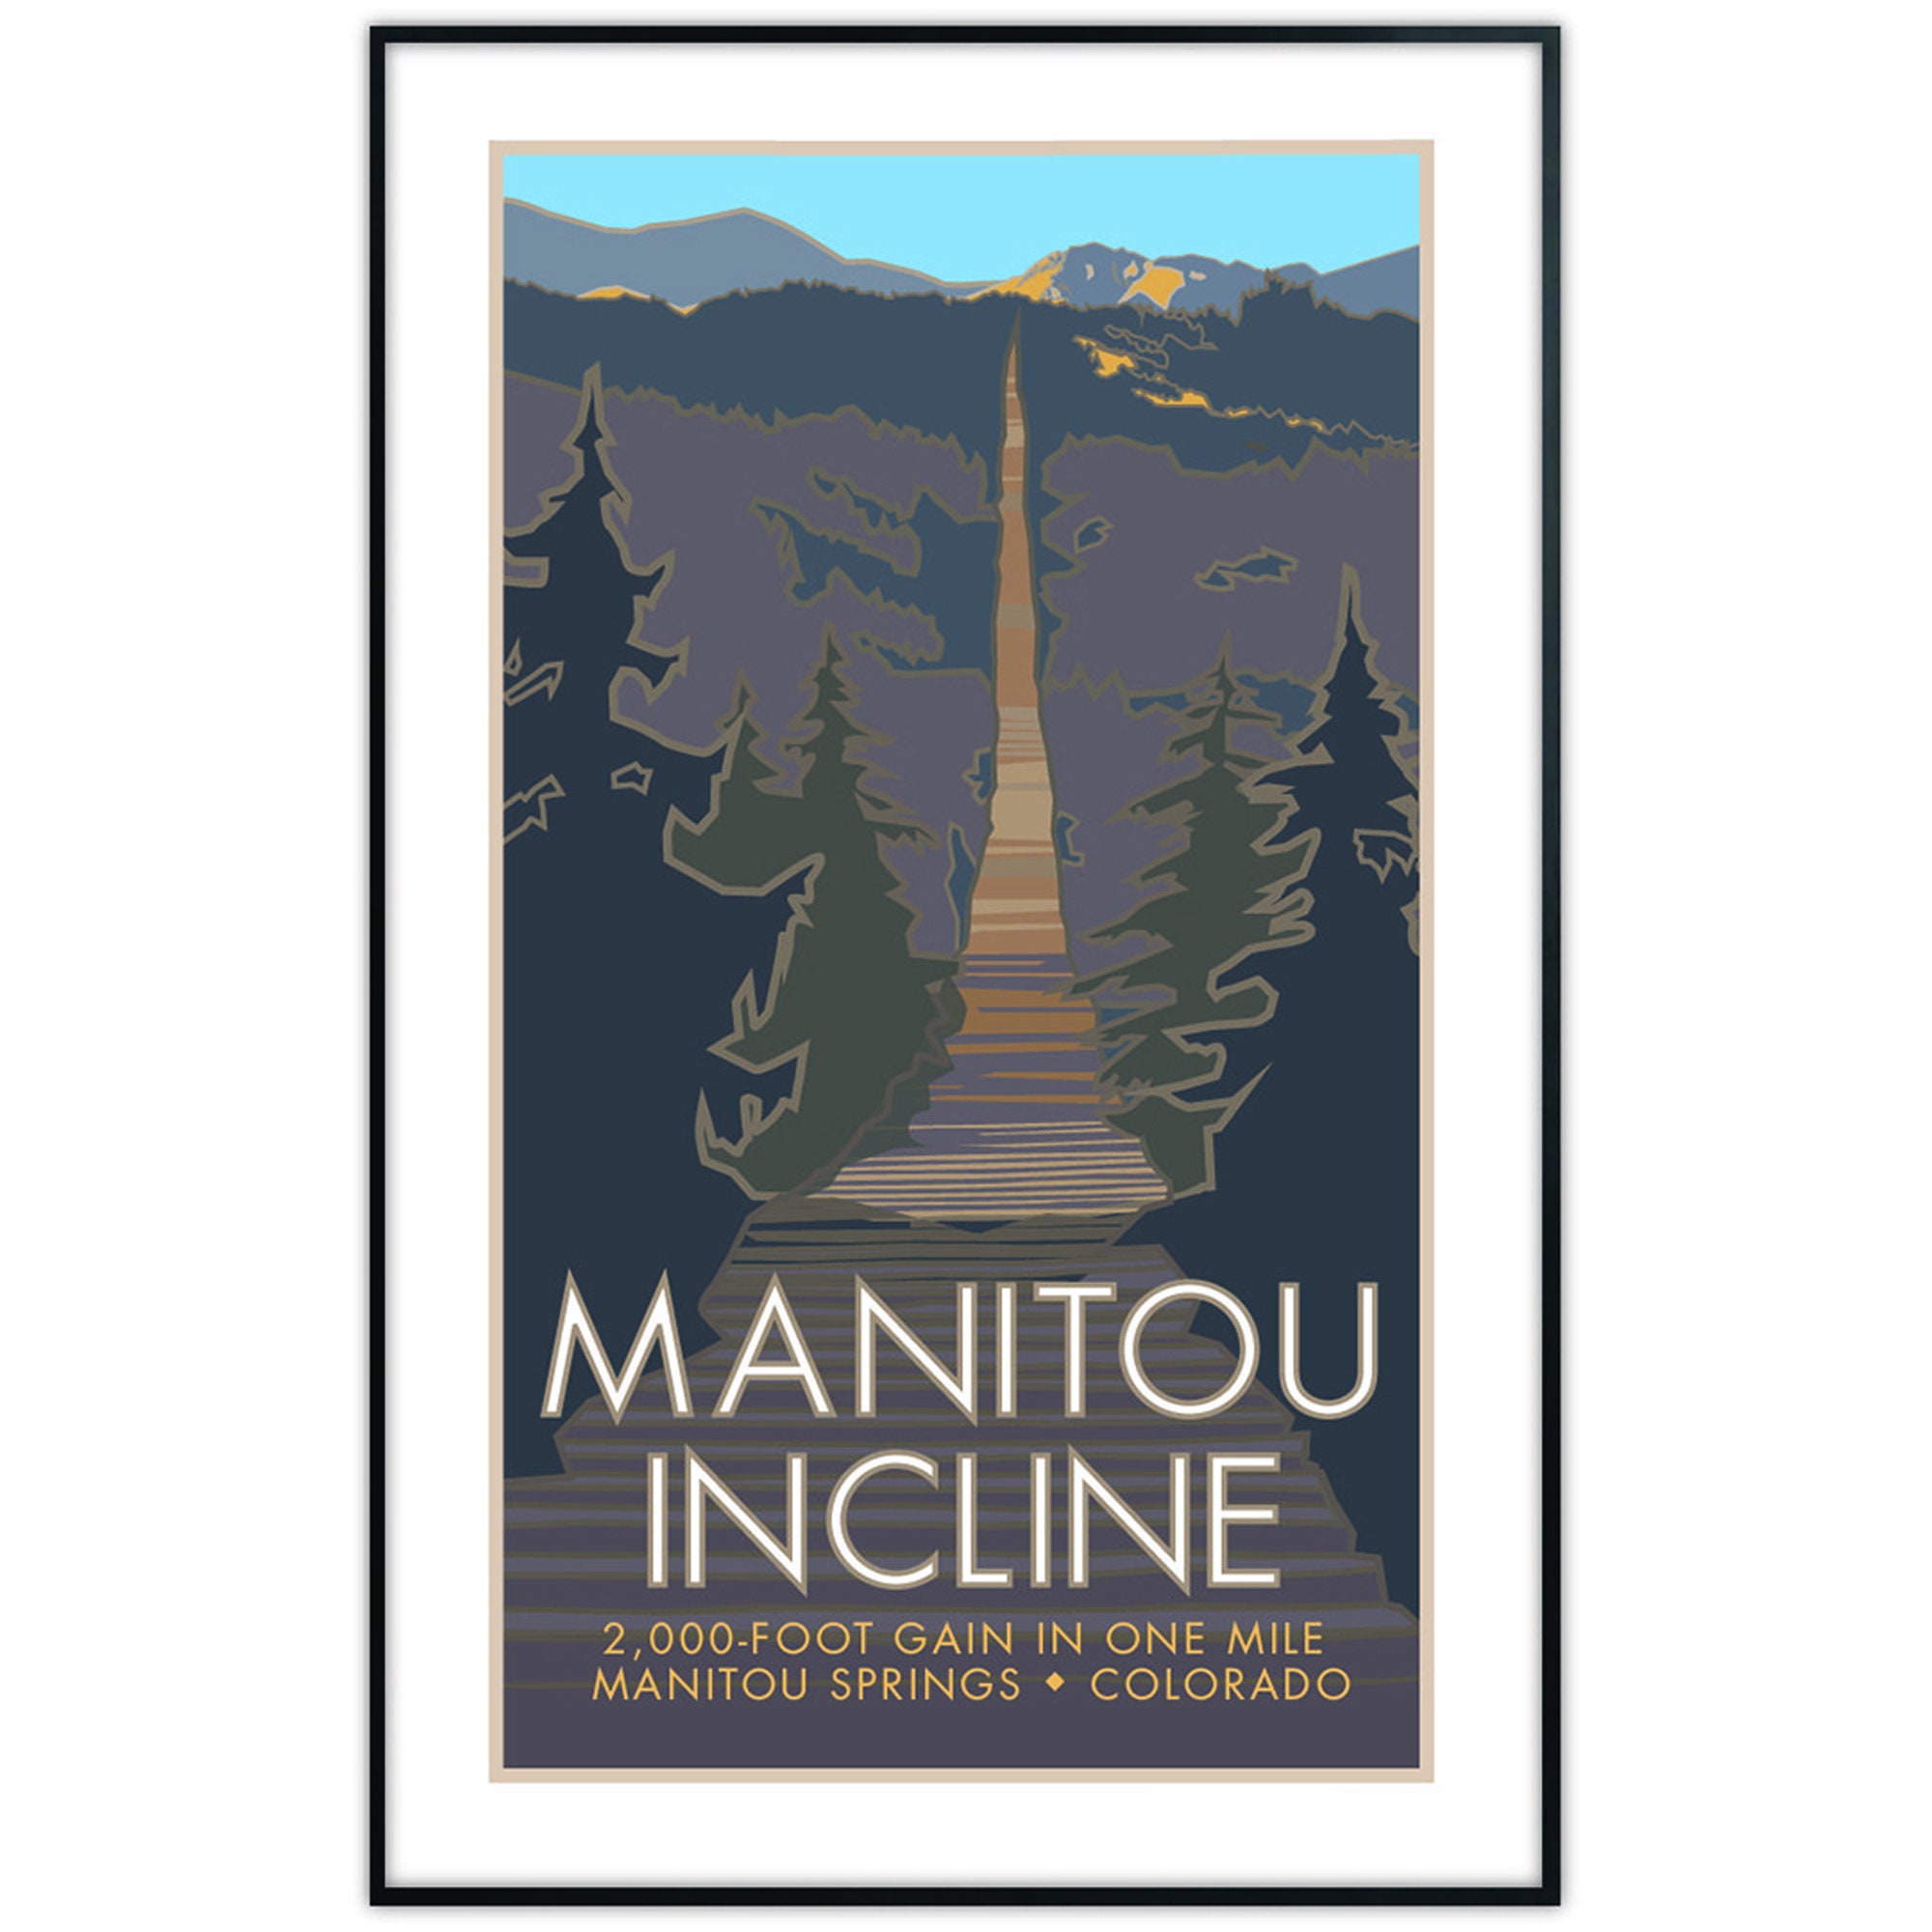 Manitou Incline Poster